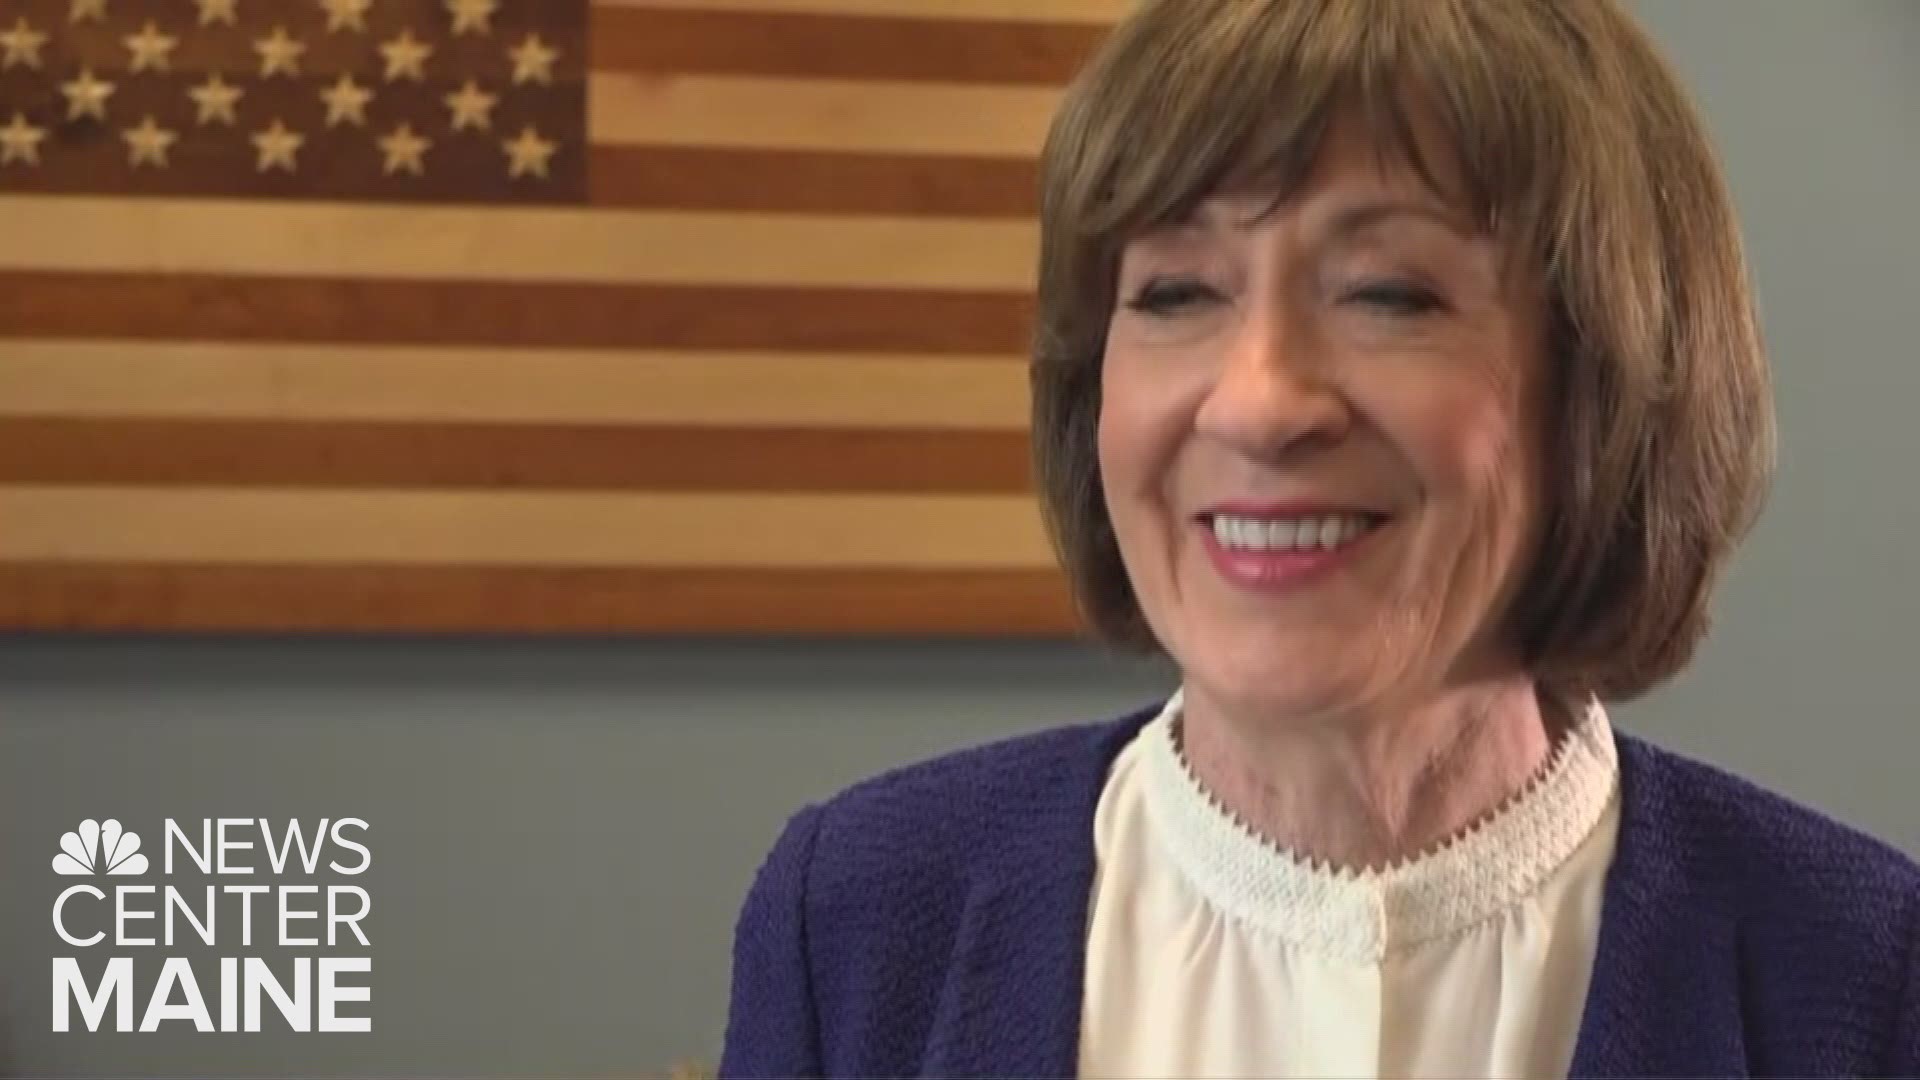 Maine Senator Susan Collins has been at the heart of the controversy surrounding the Judge Brett Kavanaugh confirmation vote. NEWS CENTER Maine spoke to the Senator soon after the historic vote.